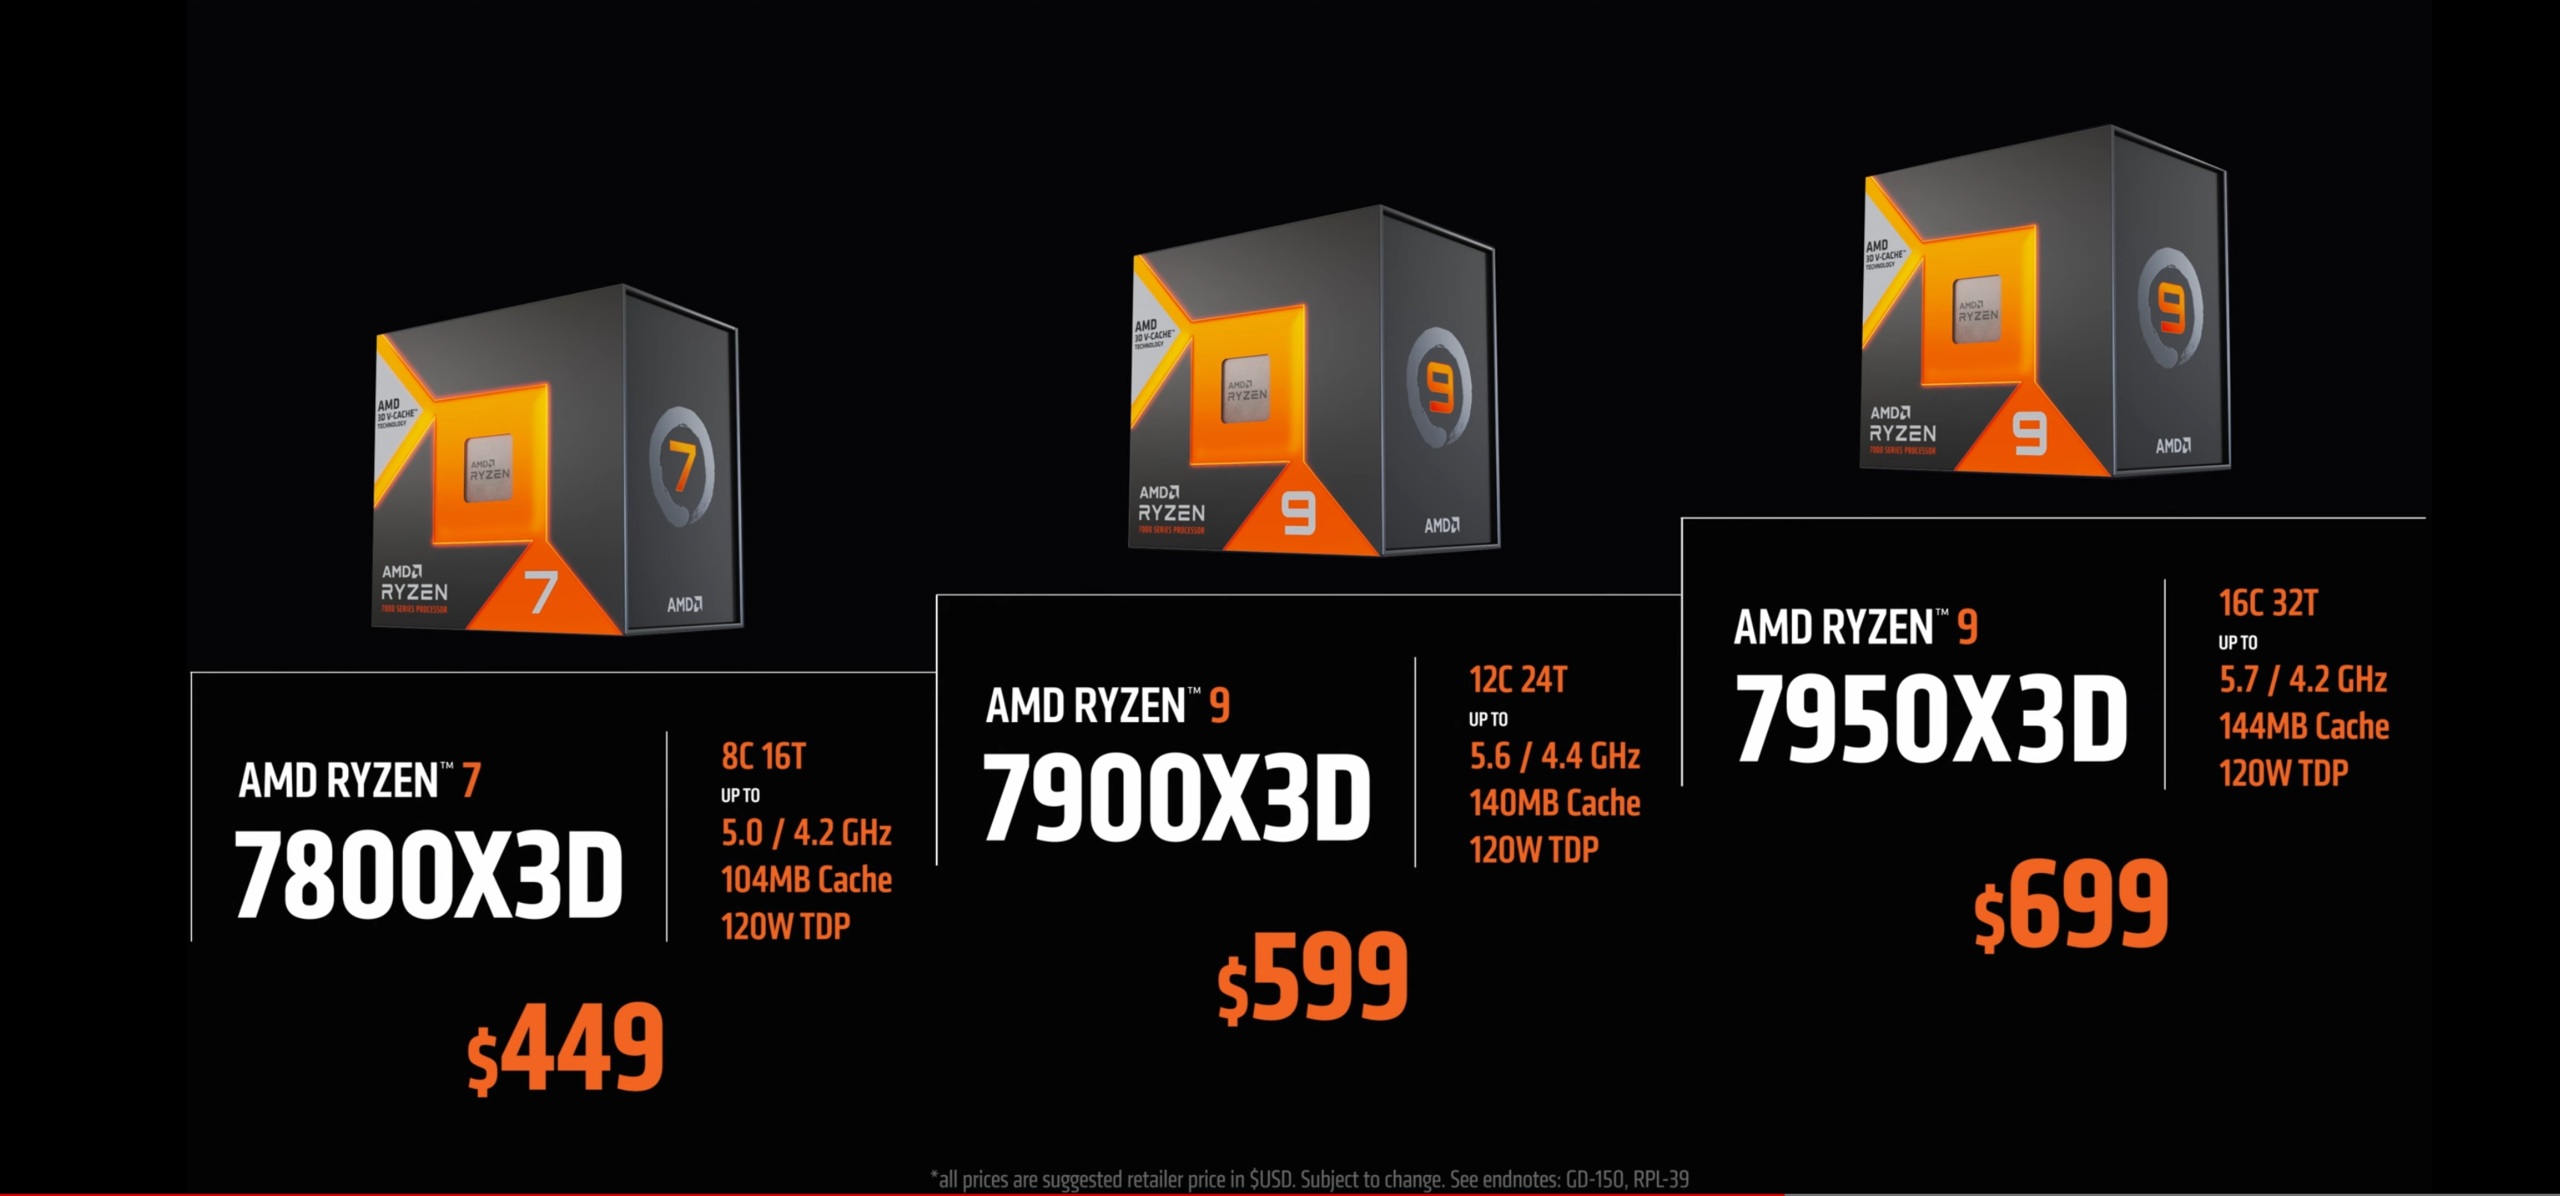 csm zen4 x3d price f8e5efac0e AMD RYZEN 7 7800X3D PROCESSOR REVIEW